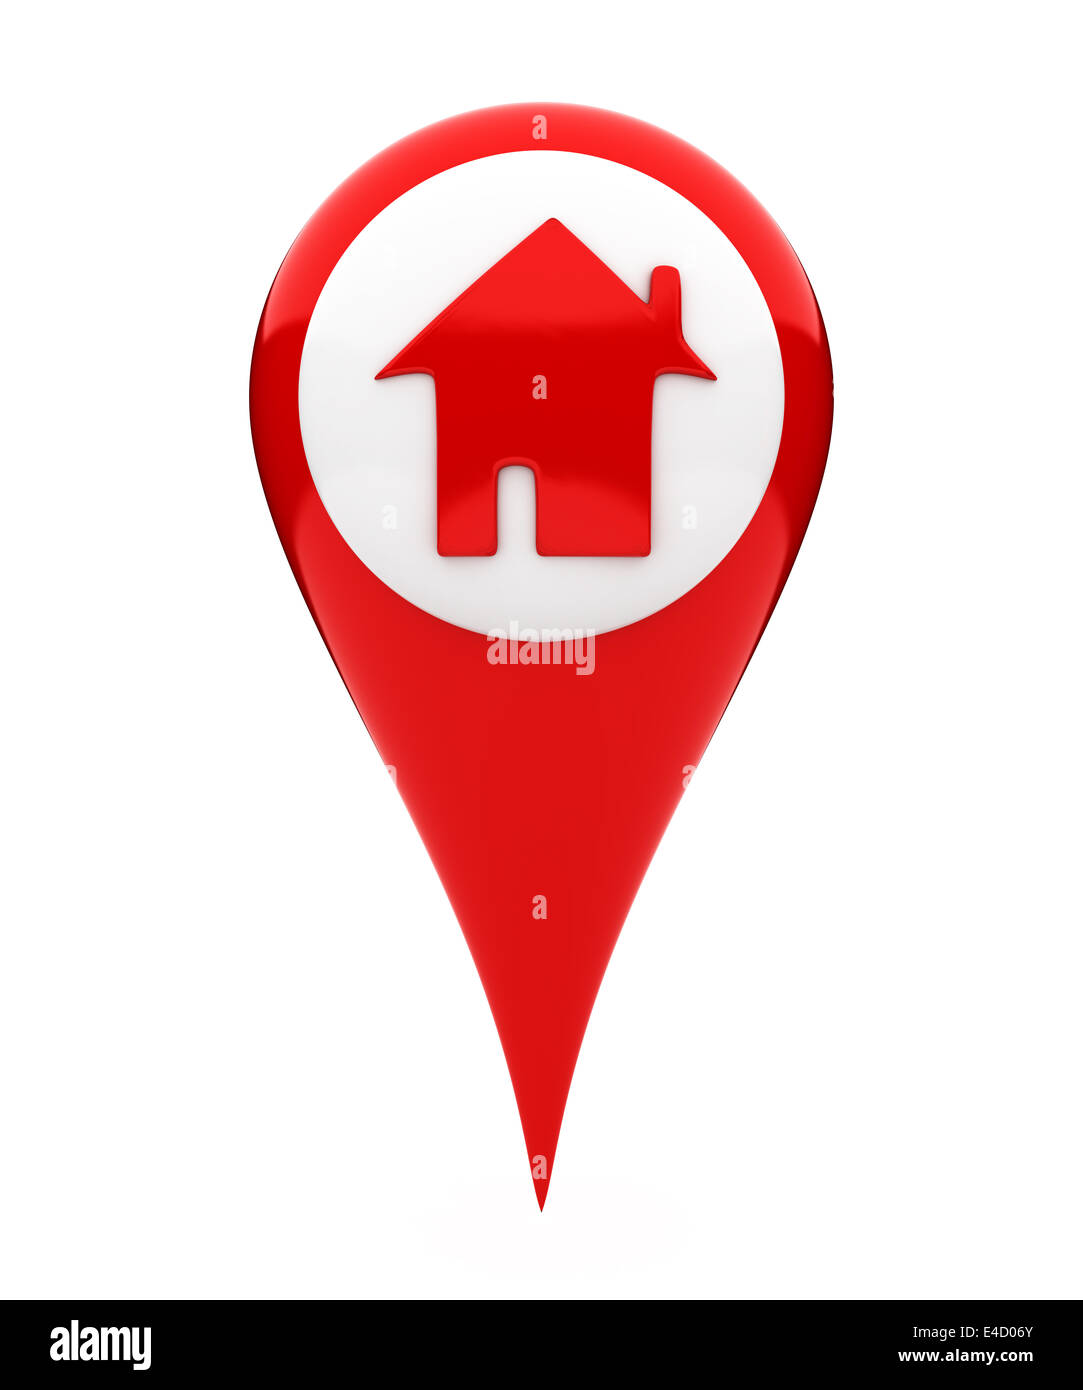 Location marker showing home icon Stock Photo